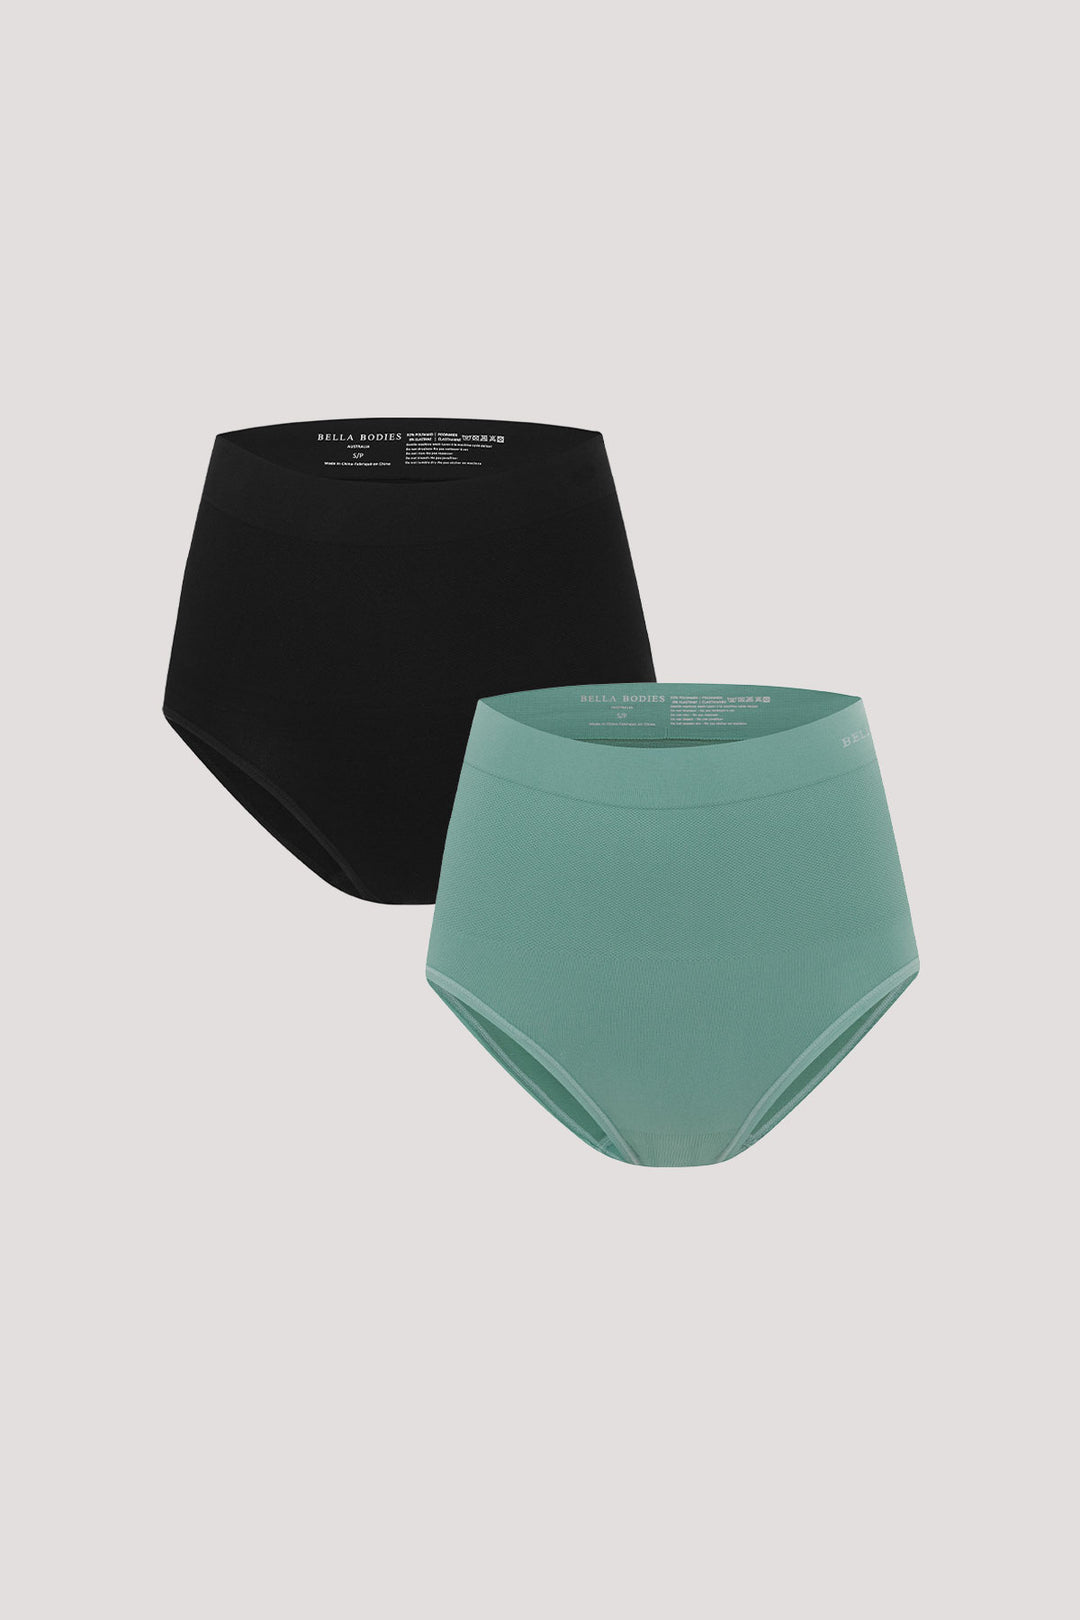 High Waist Smoothing and Firming, Full-Coverage Underwear 2 pack | Bella Bodies UK | Black and Sea Green